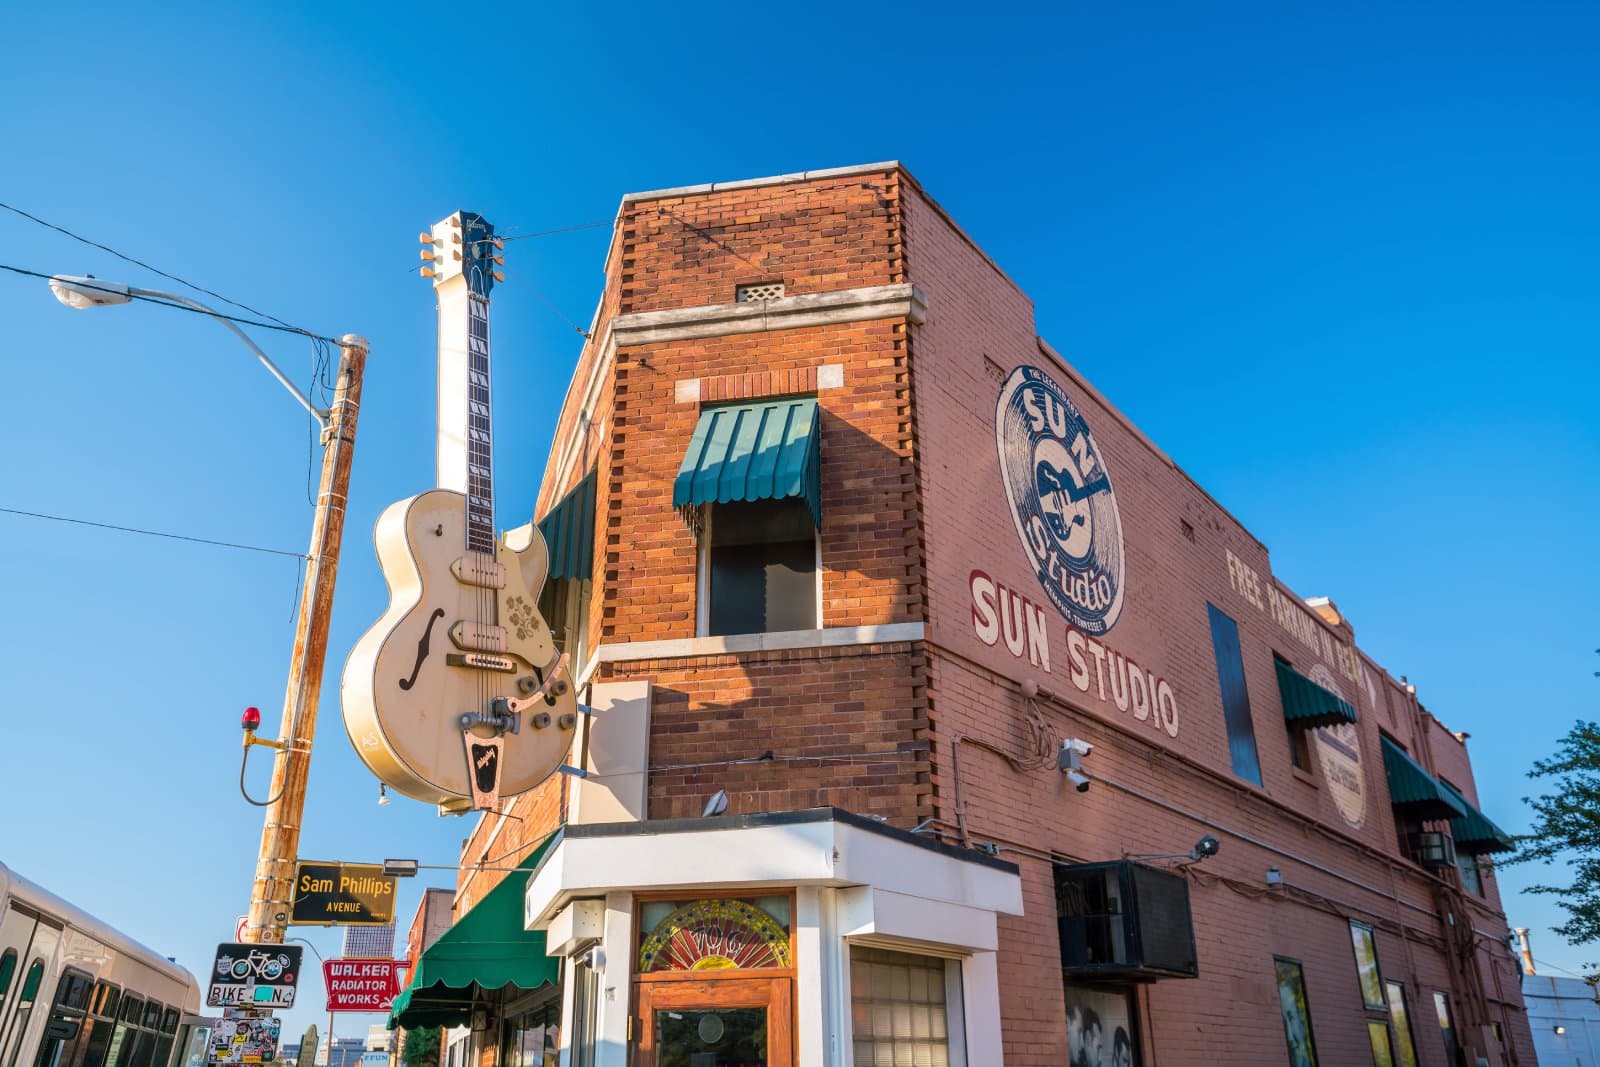 <p class="wp-caption-text">Image Credit: Shutterstock / f11photo</p>  <p><span>Sun Studio in Memphis is the birthplace of rock ‘n’ roll. This legendary recording studio saw the likes of Elvis Presley, Johnny Cash, and B.B. King laying down tracks that would define a generation. A tour of Sun Studio offers insights into the recording process and immerses visitors in the history of American music.</span></p>